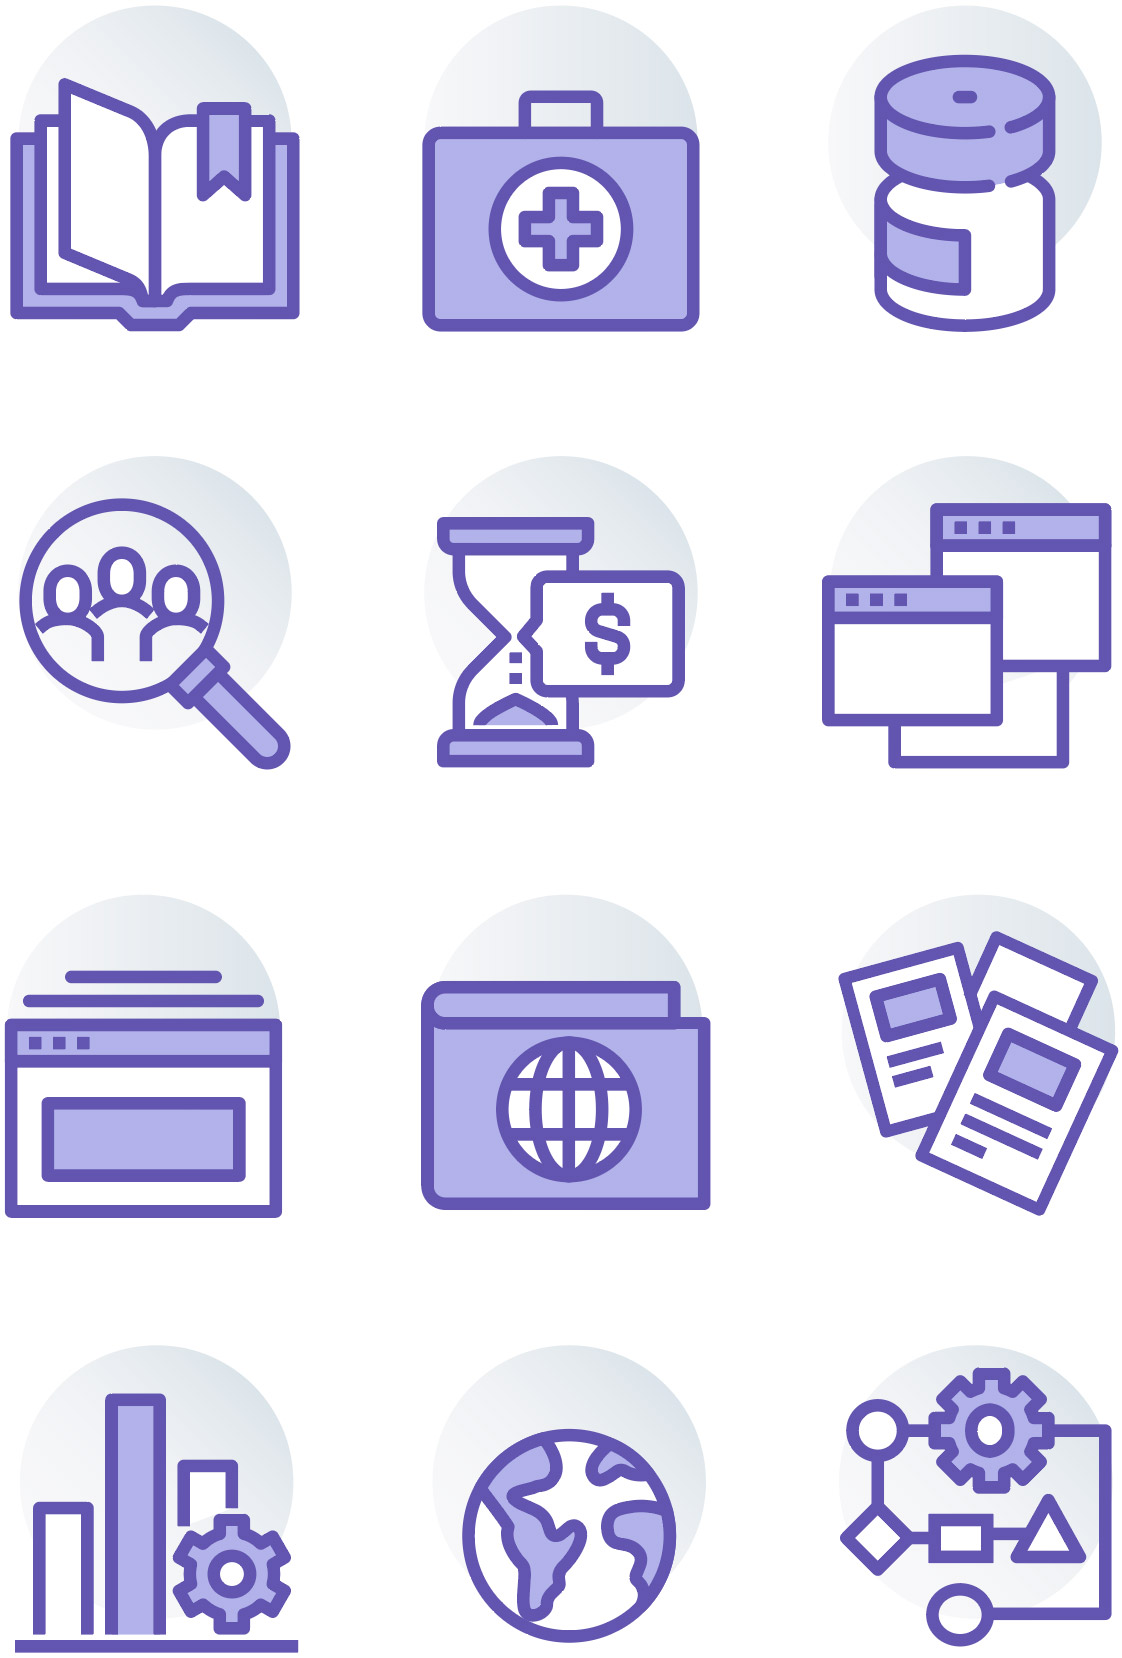 nView icons